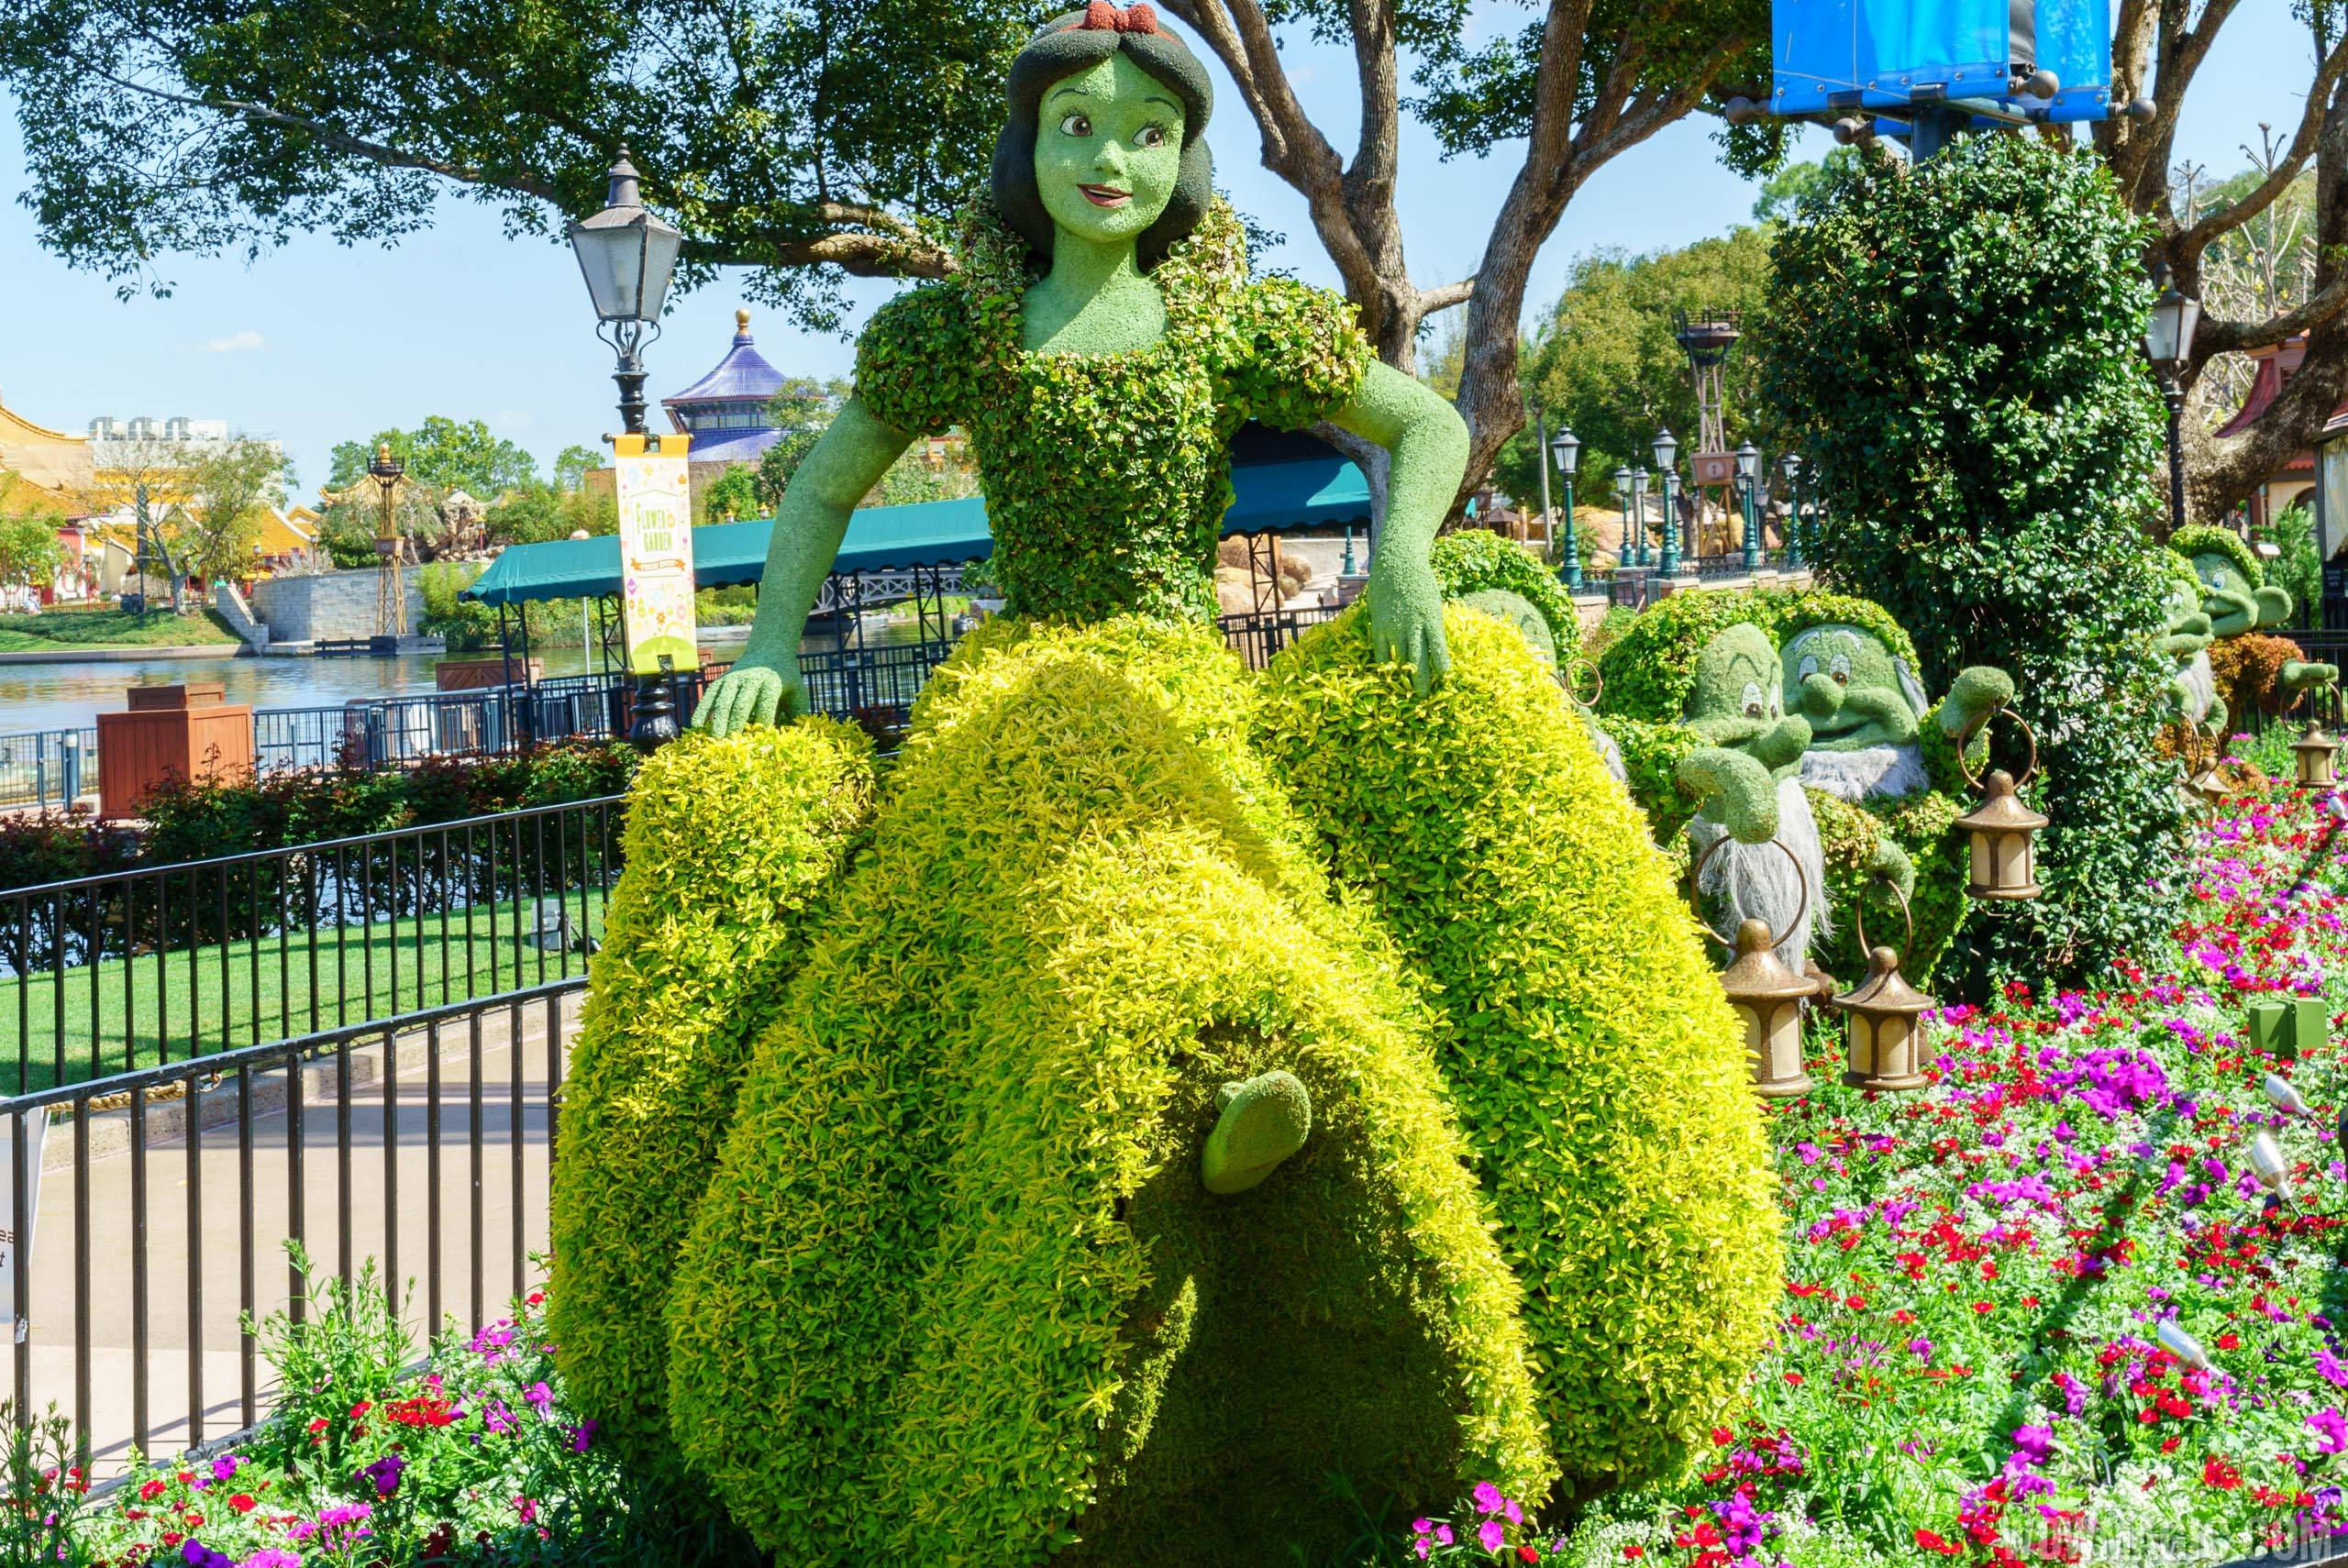 2016 Epcot International Flower and Garden Festival - Snow White and the Seven Dwarfs topiaries